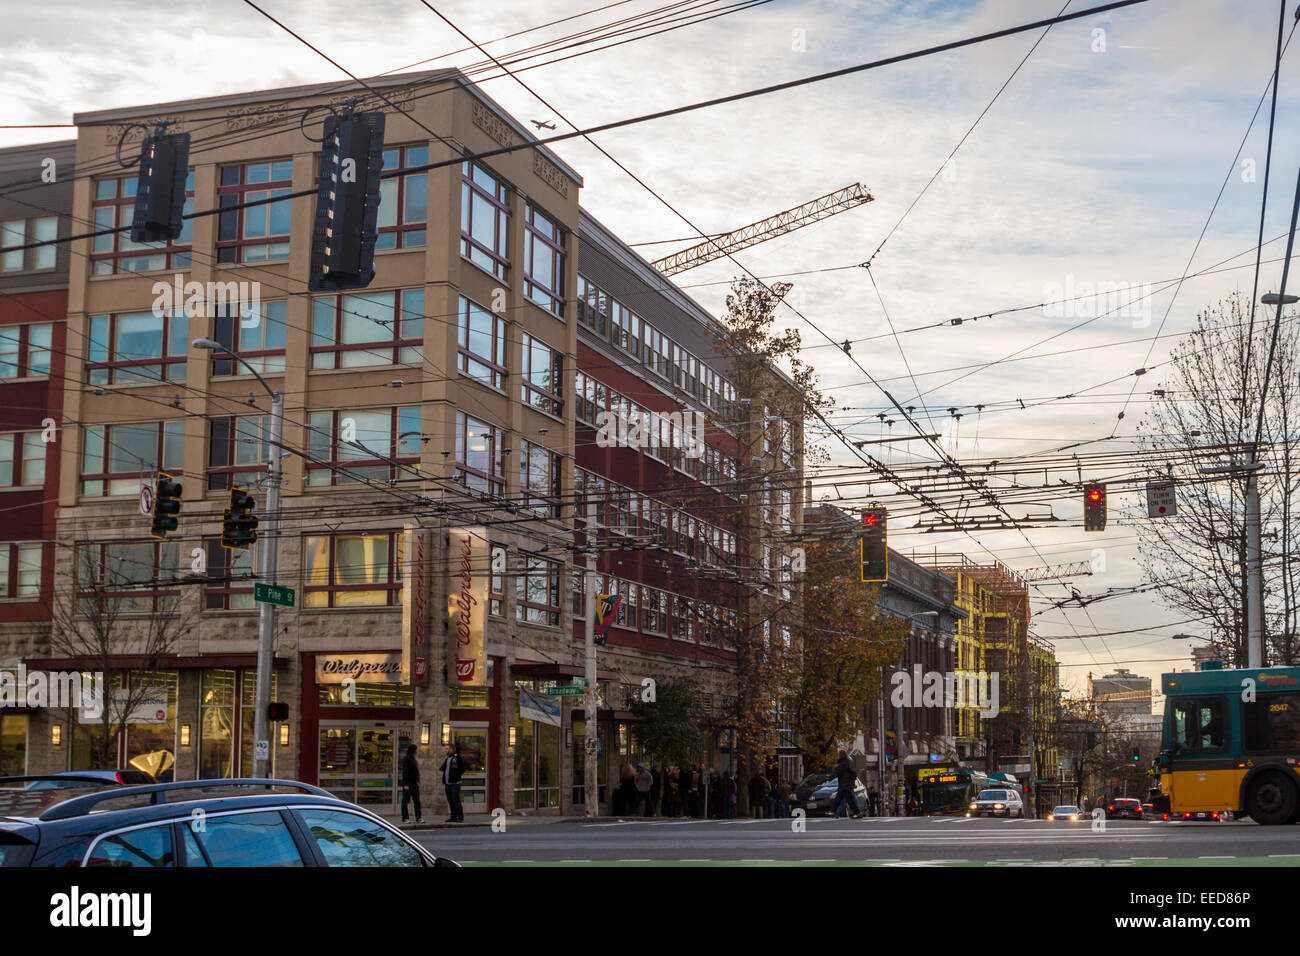 A street scene in the Capitol Hill neighborhood of Seattle, at the intersection of Broadway and pine street. Stock Photo